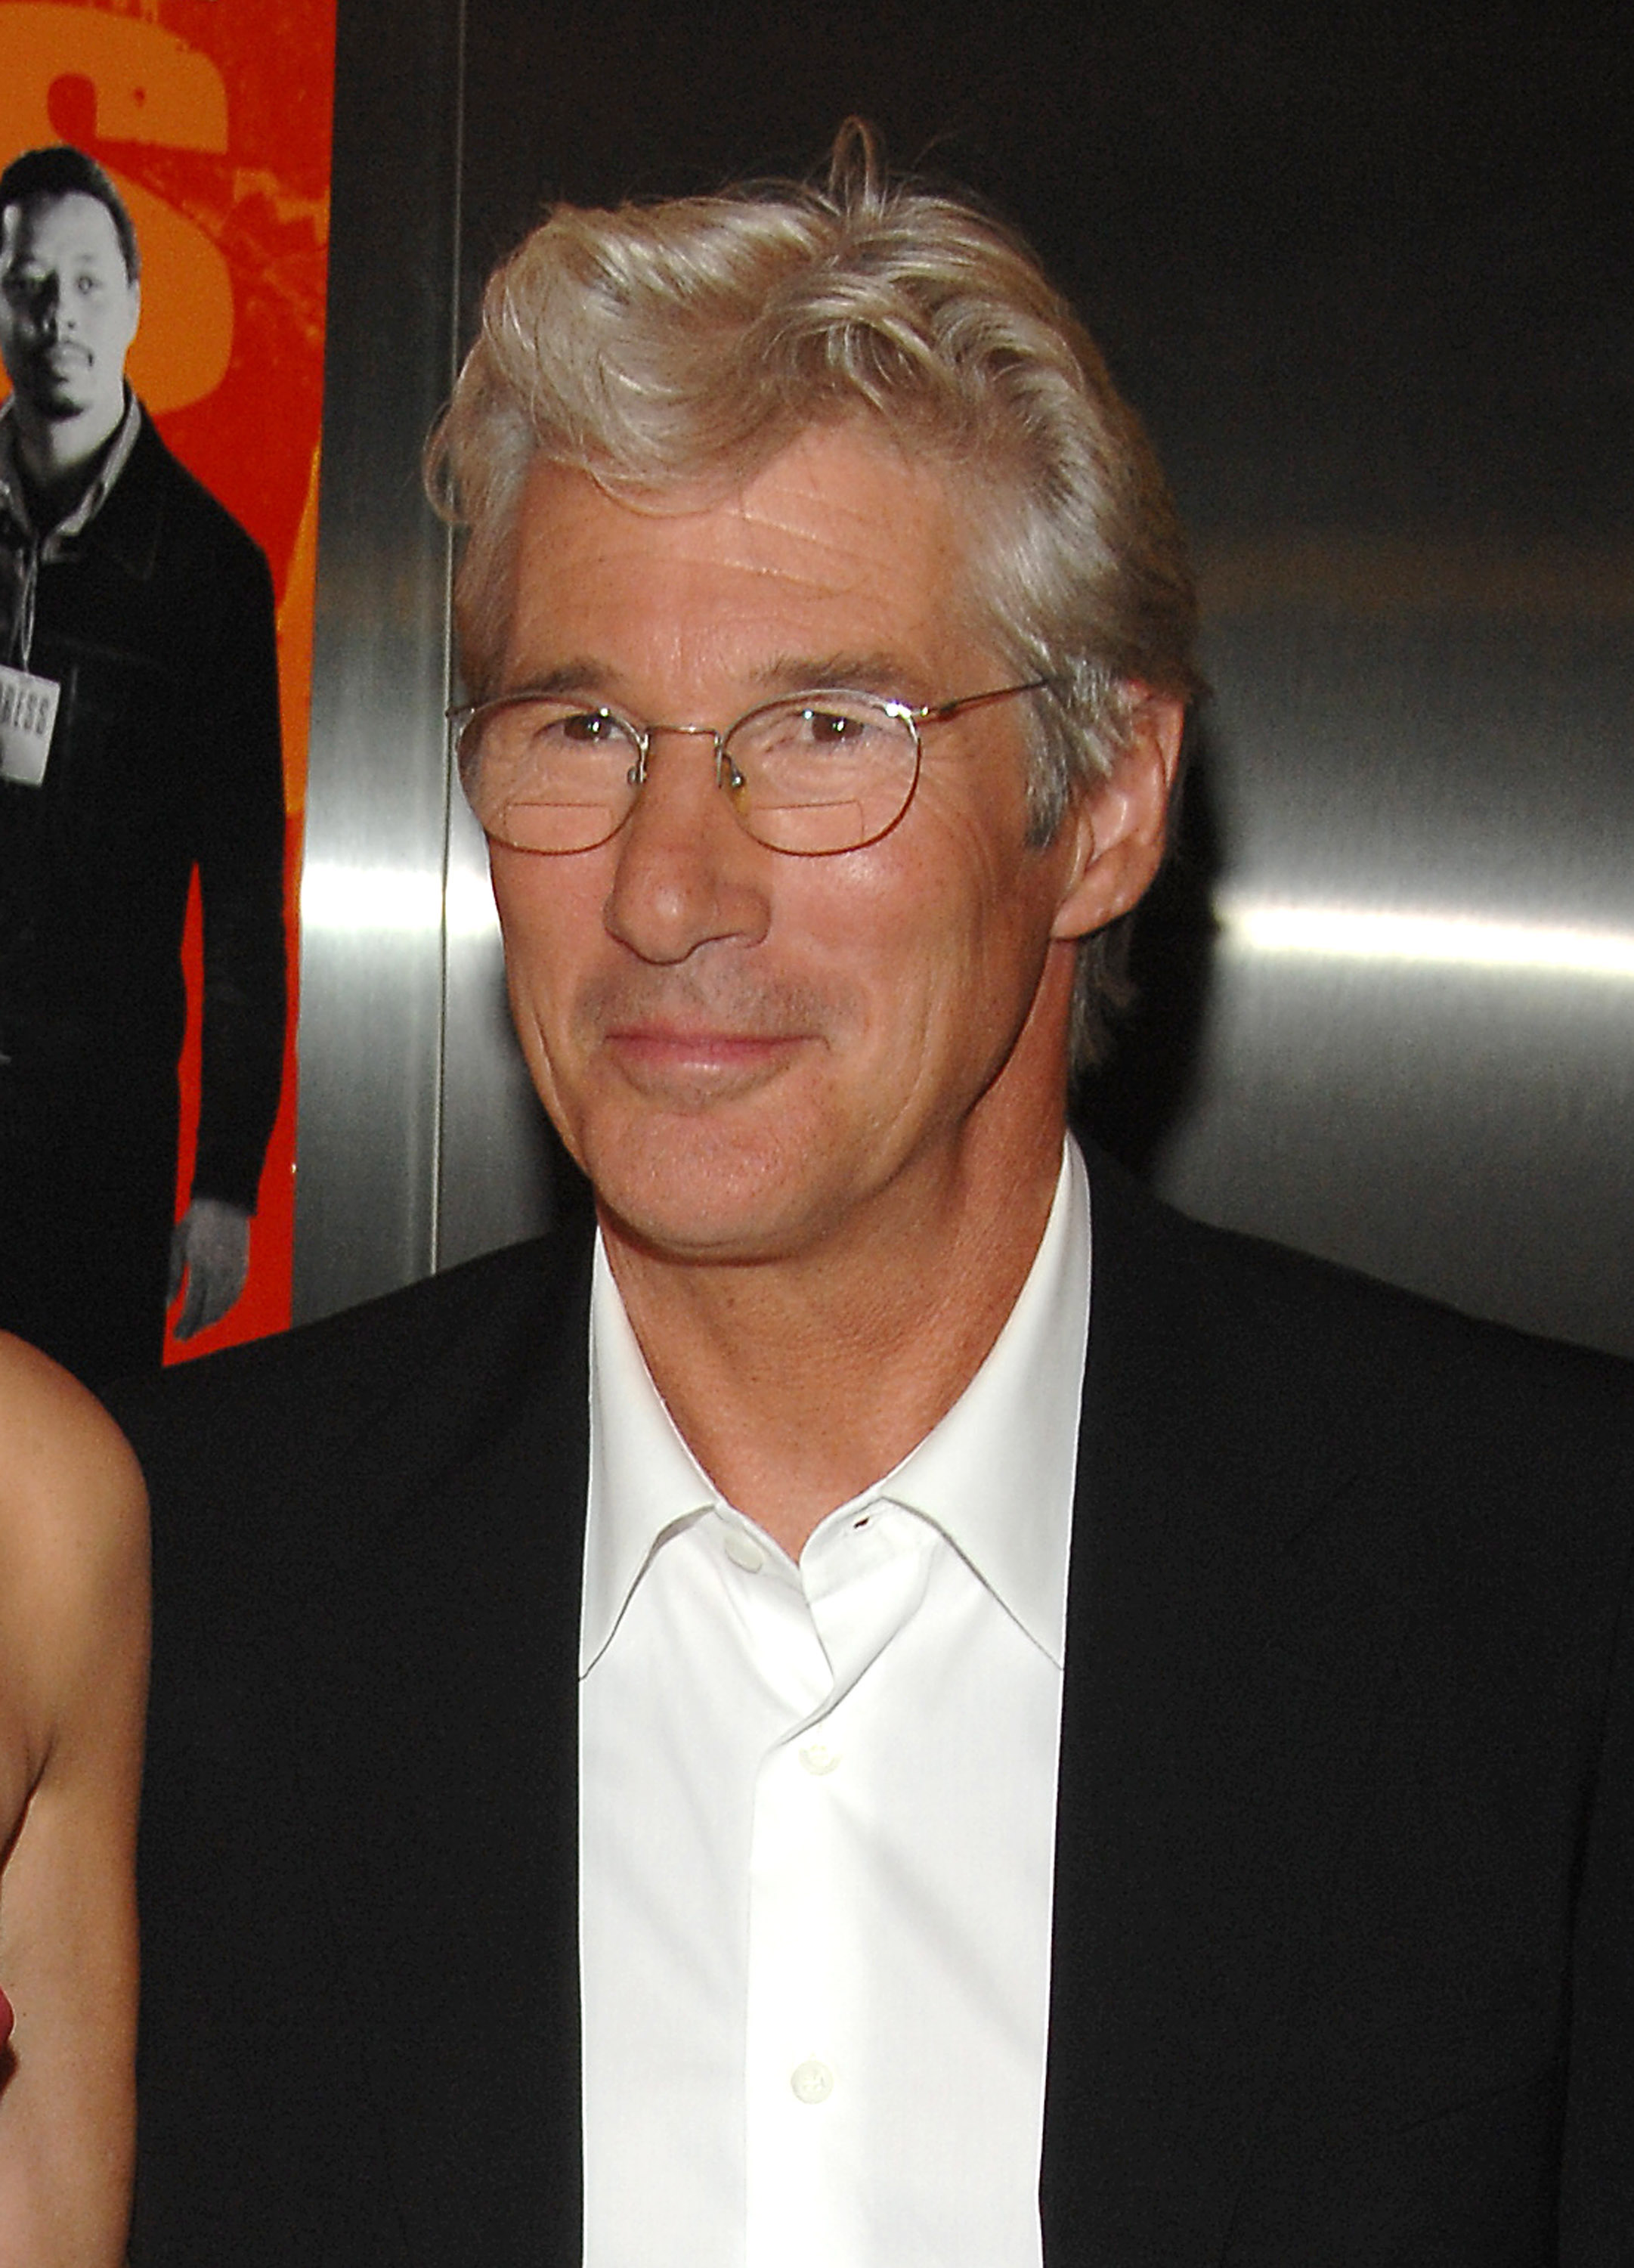 Richard Gere at the premiere of "The Hunting Party" on August 22, 2007, in New York City | Source: Getty Images